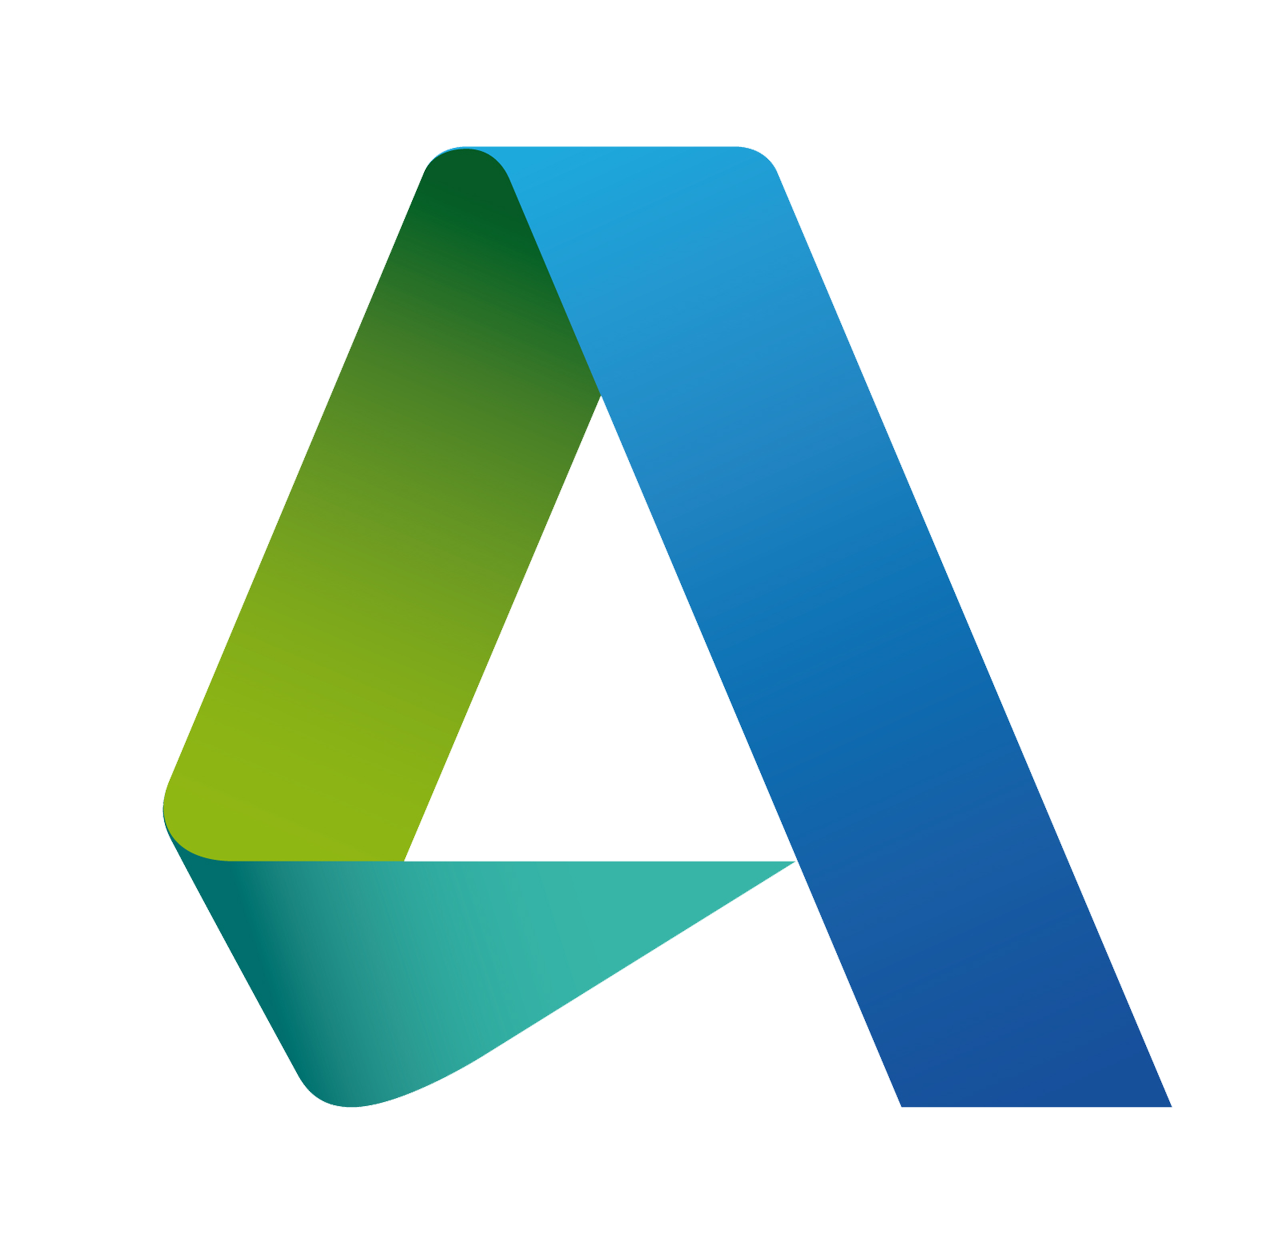 autodesk free software for students and educators